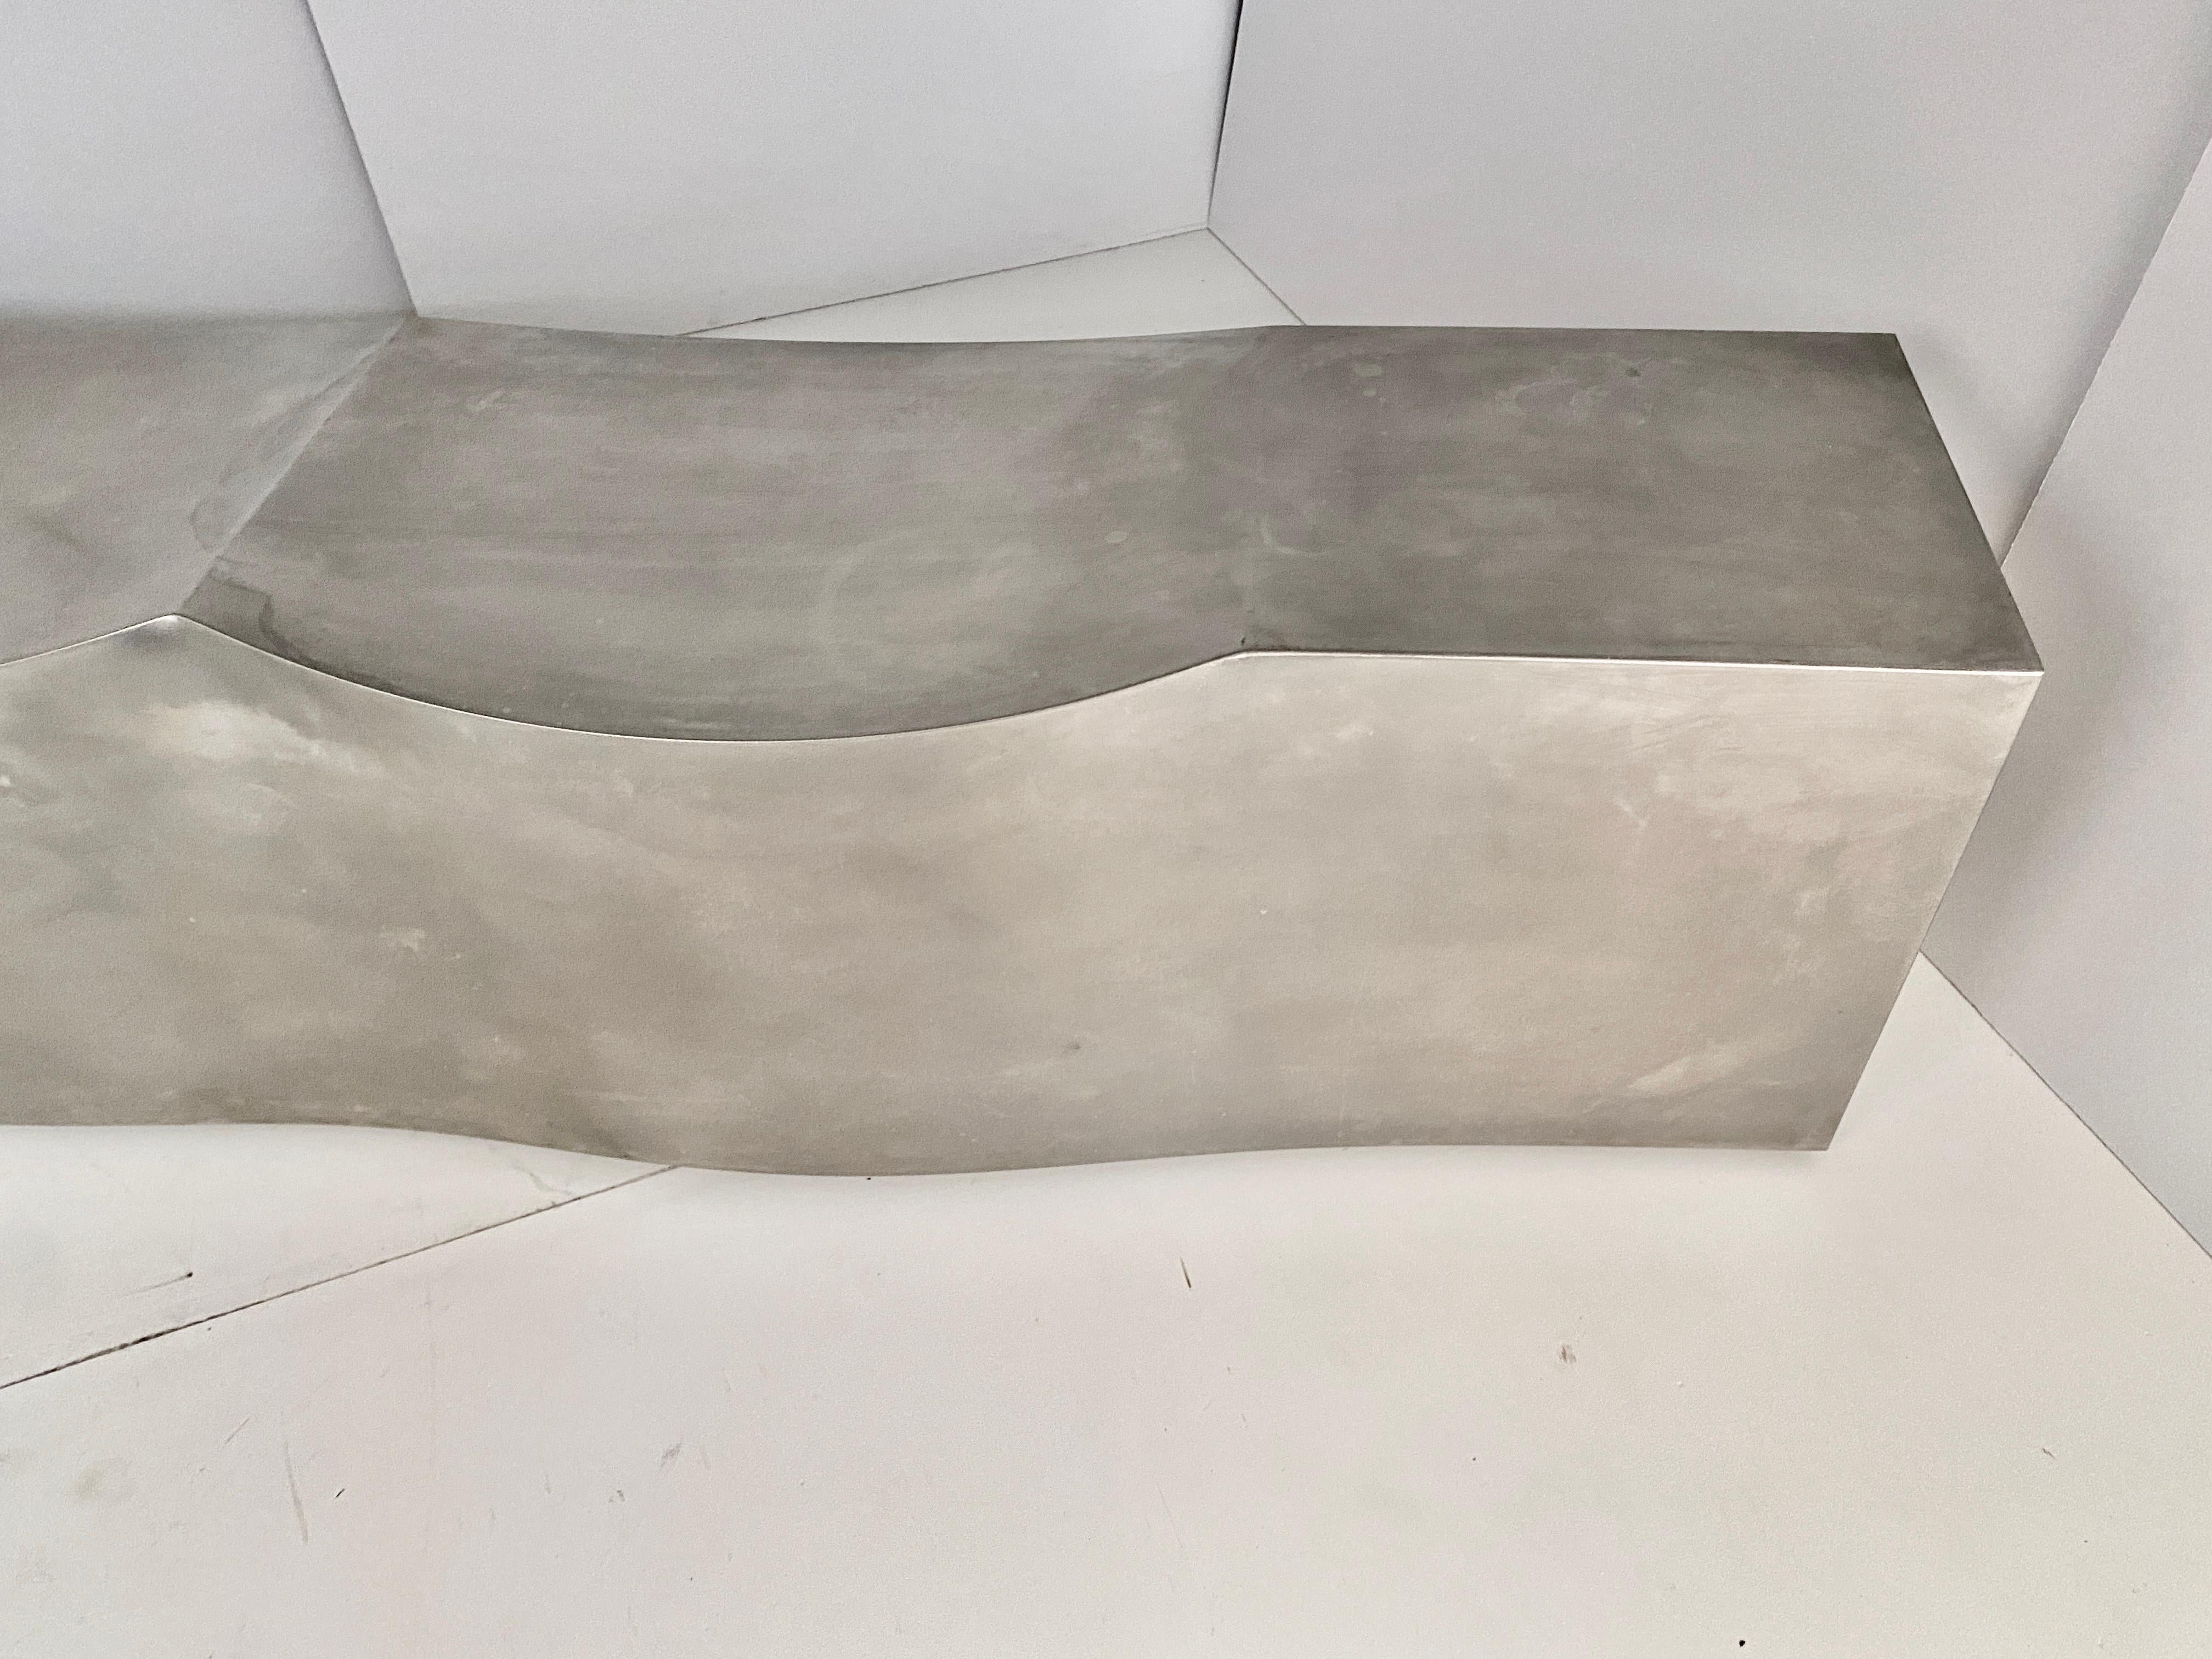 The Double Dip Bench is built using a stainless steel sheet with a thickness of 1.5 mm and a circular sandblasted finish. The distinctive shape is obtained with special technology involving milling, bending and welding. It appears as a sculpted